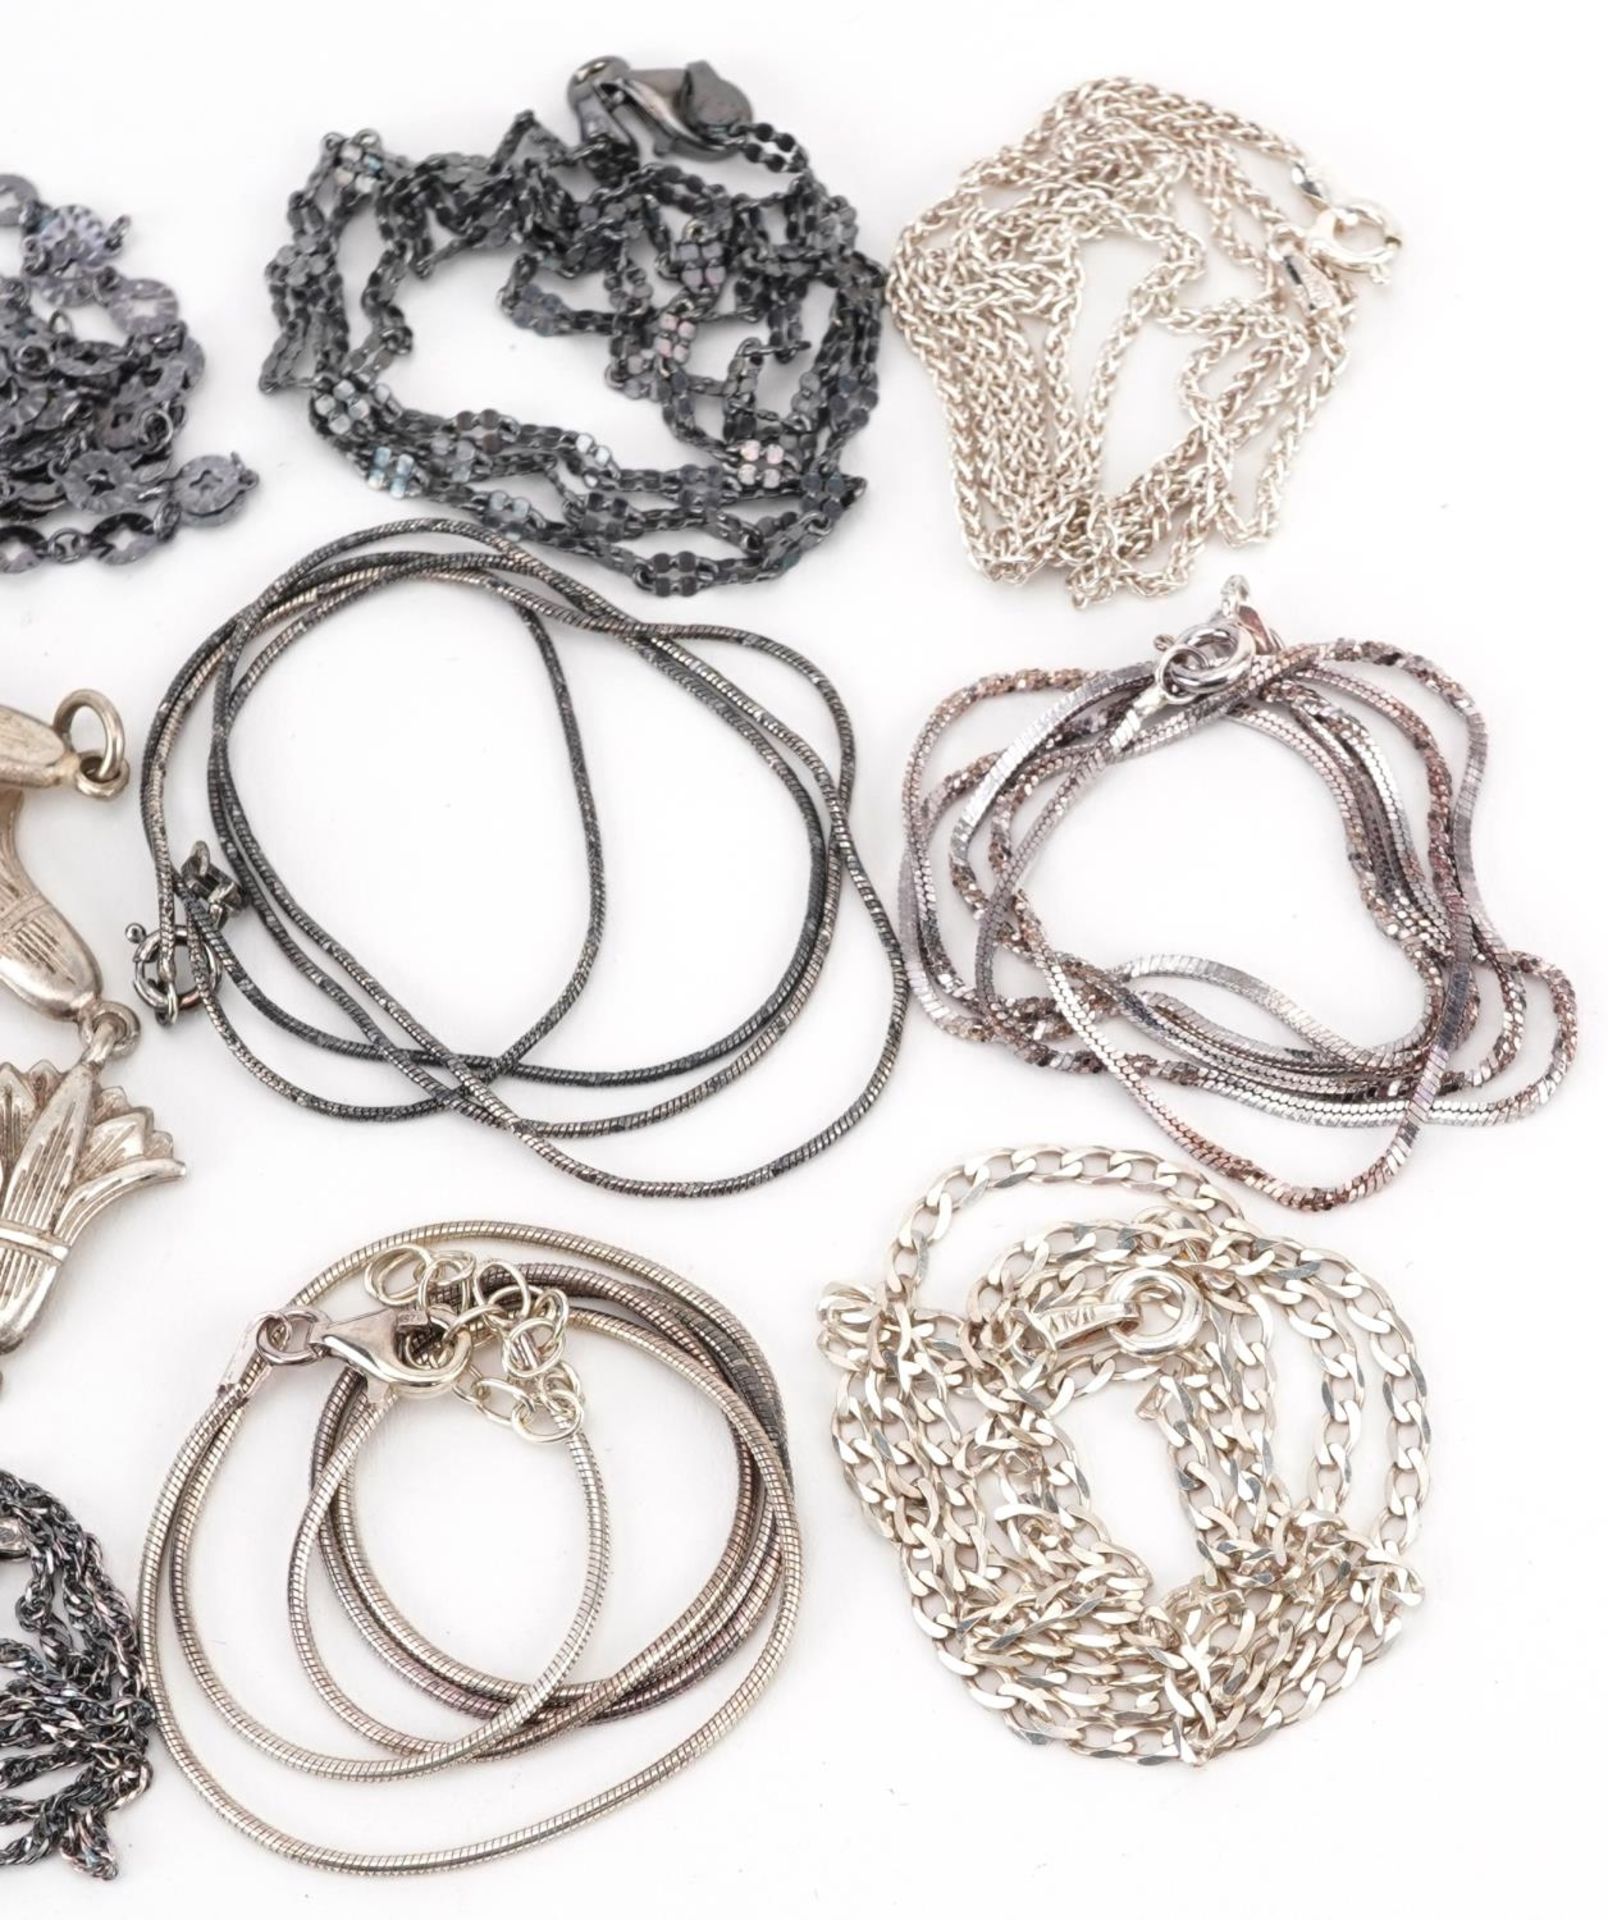 Silver jewellery comprising eleven necklaces and two floral bracelets, 55.0g - Image 3 of 3